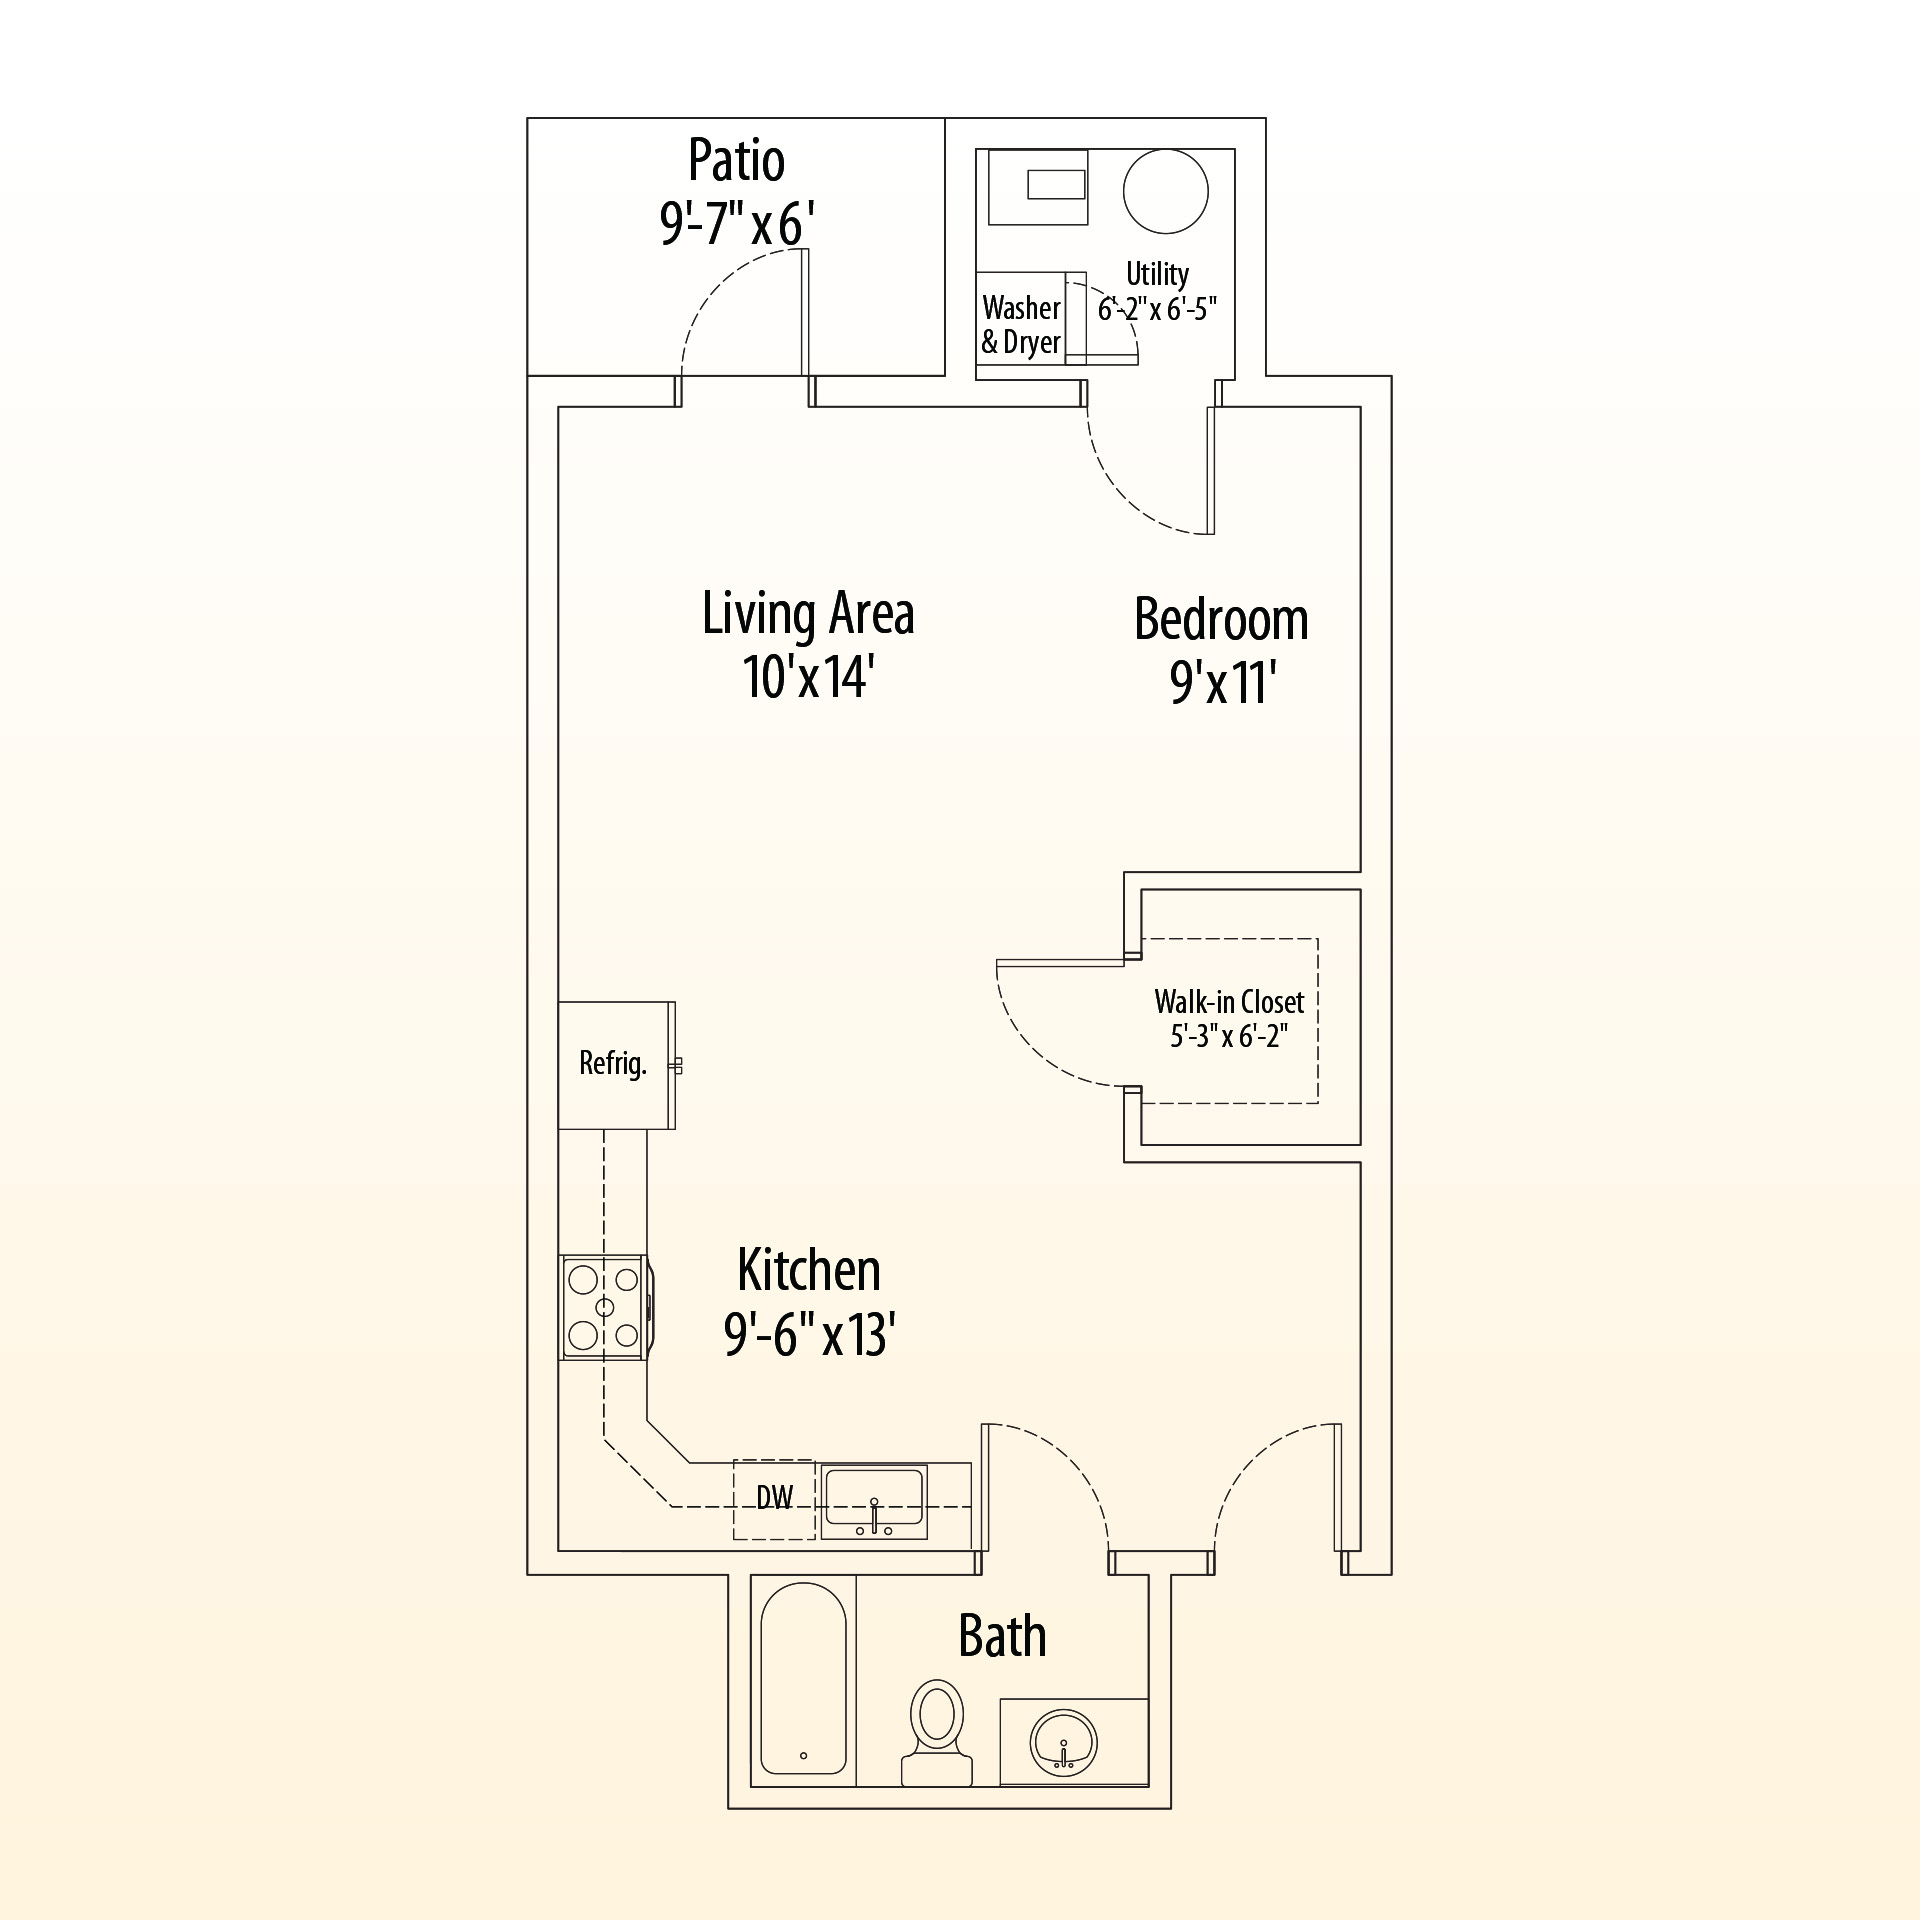 a floor plan of a bedroom and living area